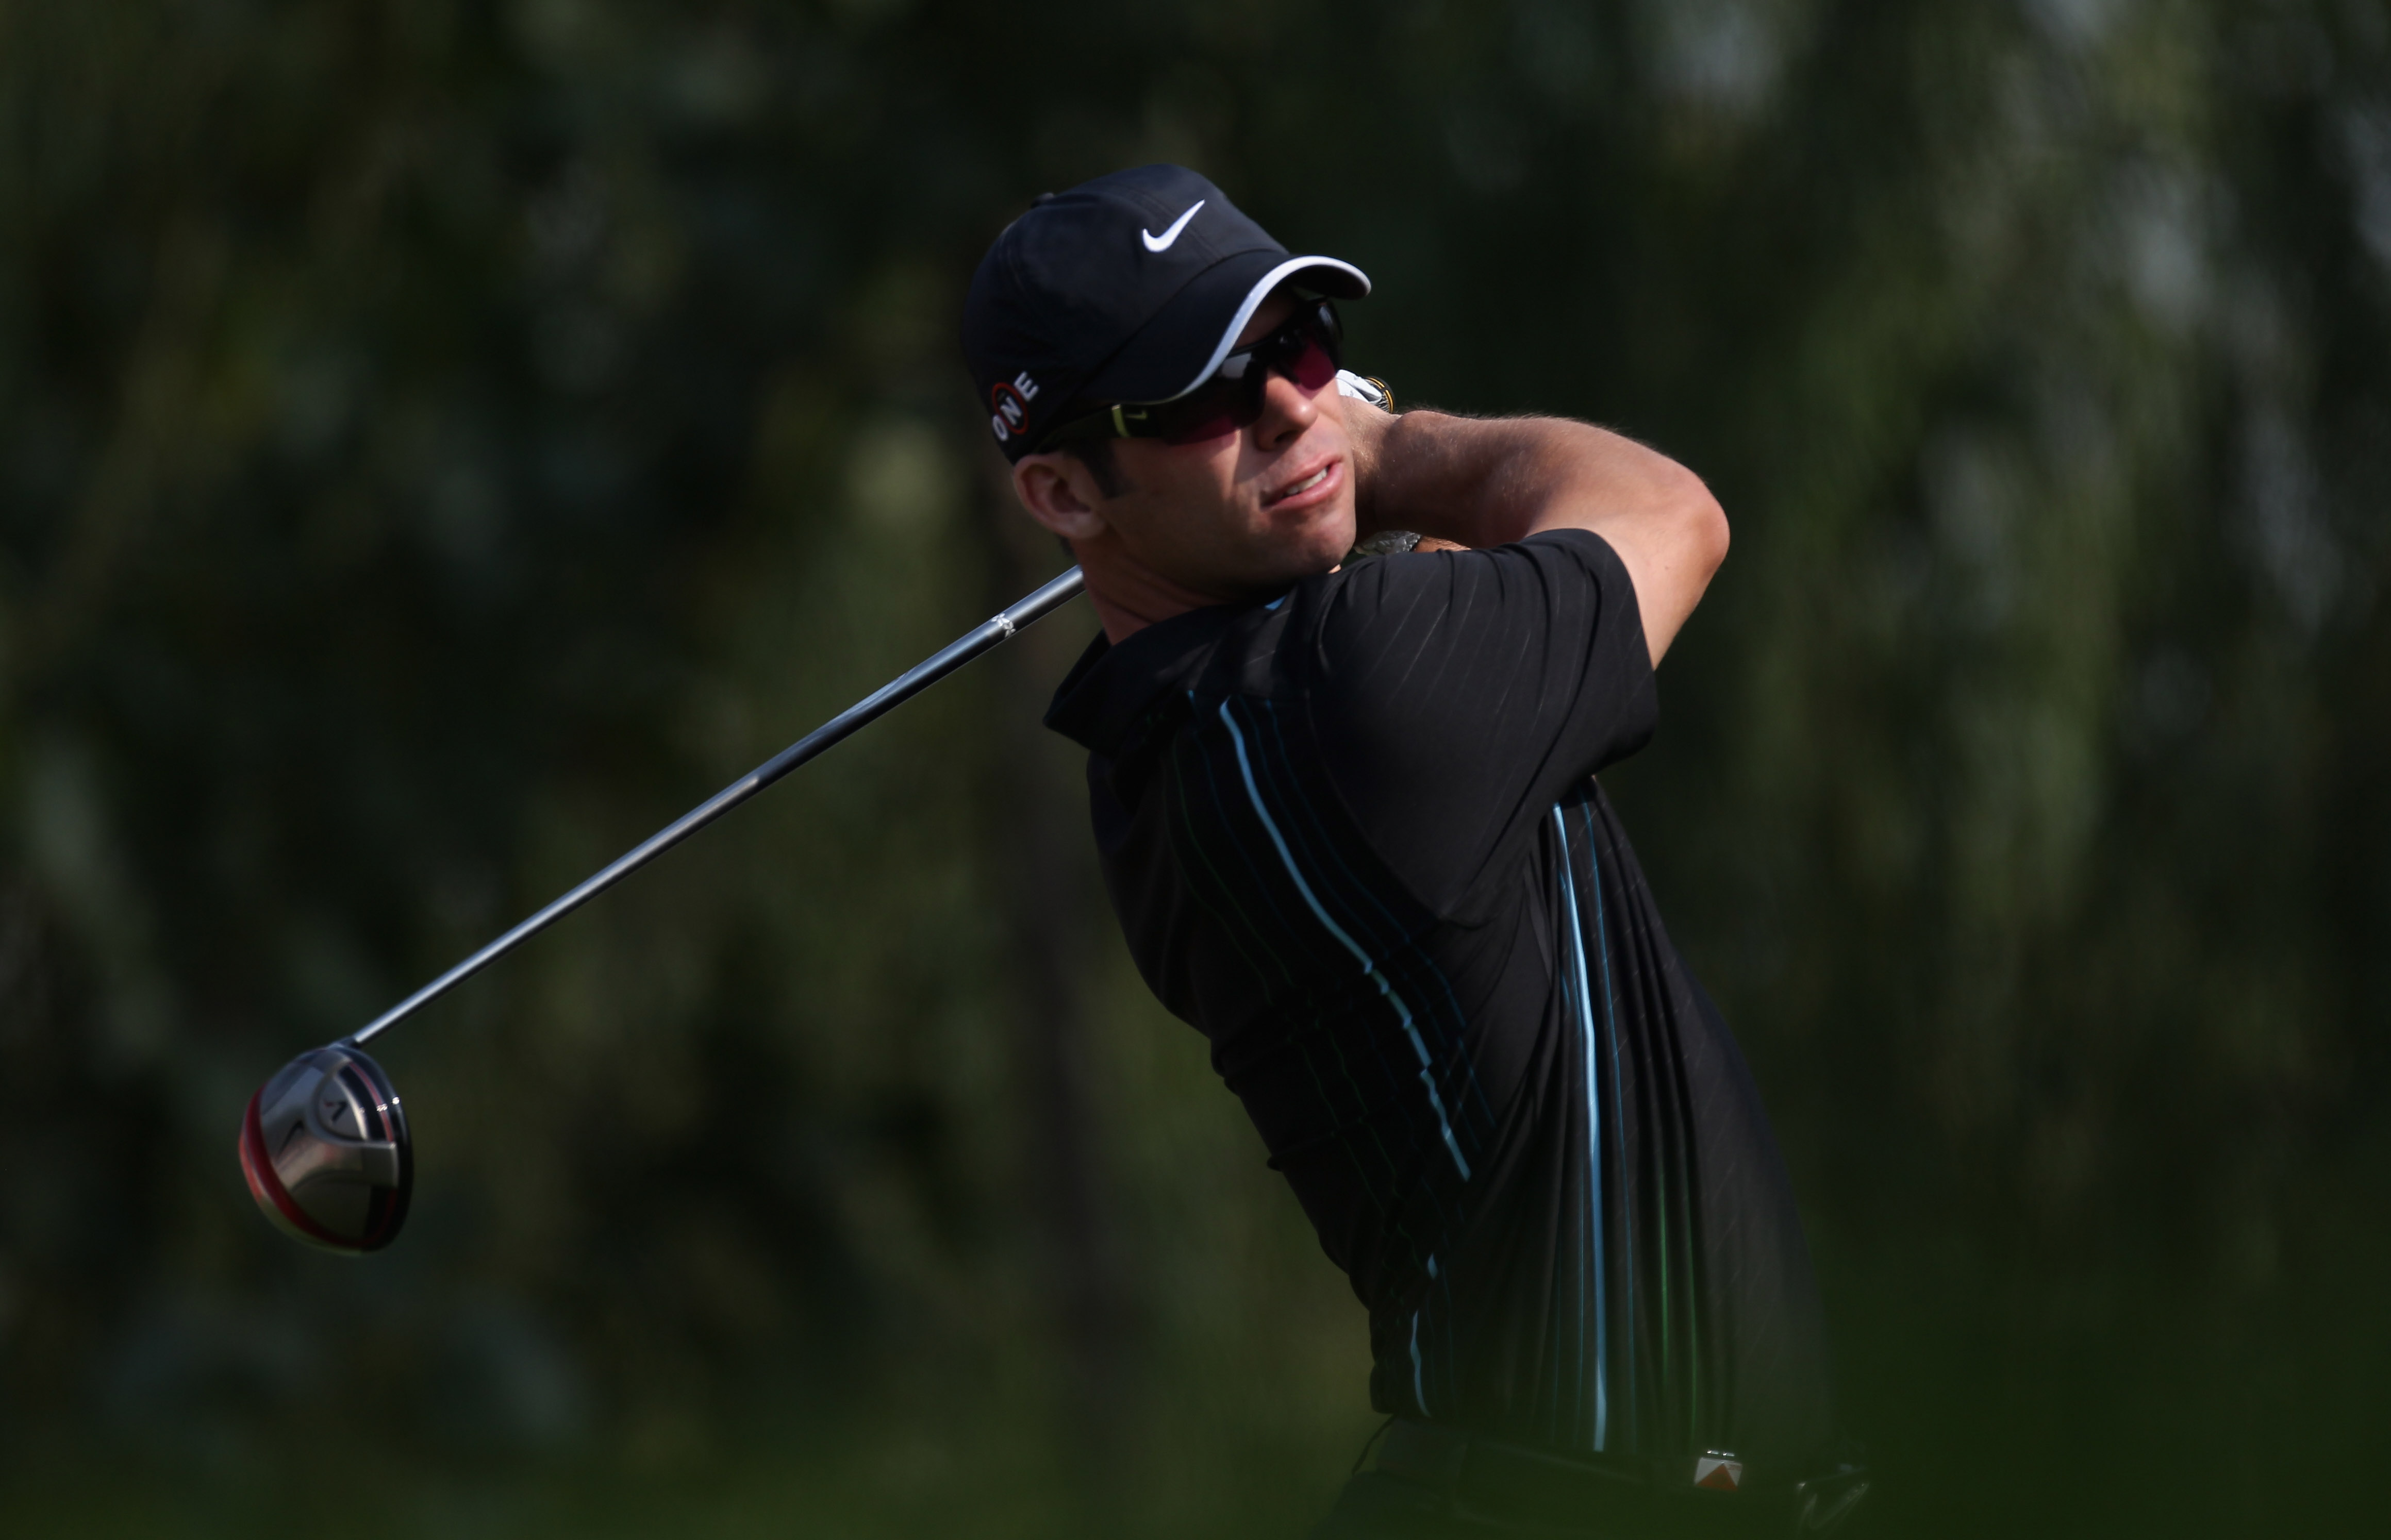 SHANGHAI, CHINA - NOVEMBER 04:  Paul Casey of England during the first round of the WGC - HSBC Champions at Sheshan International Golf Club on November 4, 2010 in Shanghai, China.  (Photo by Ross Kinnaird/Getty Images)